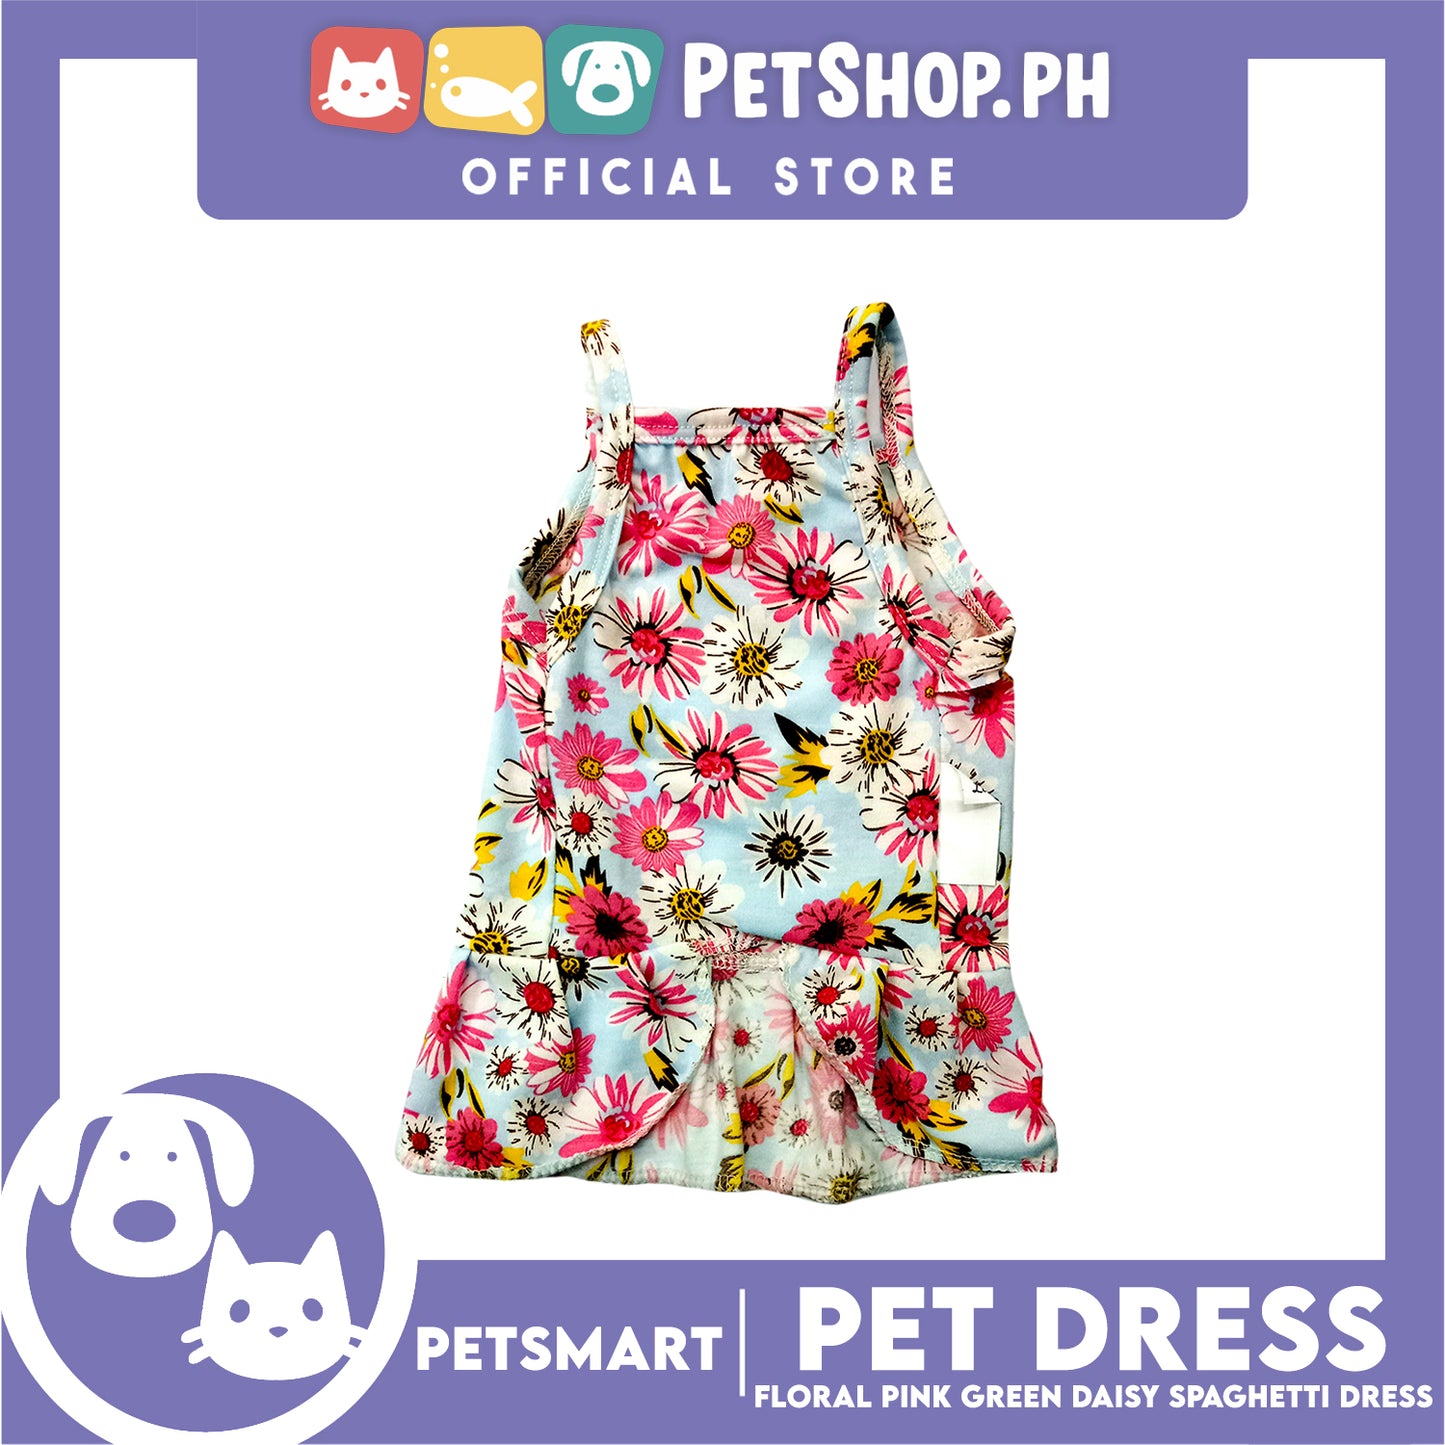 Pet Dress Floral Design, Pink Green Color Daisy Spaghetti Dress (Small) Perfect Fit for Dogs and Cats